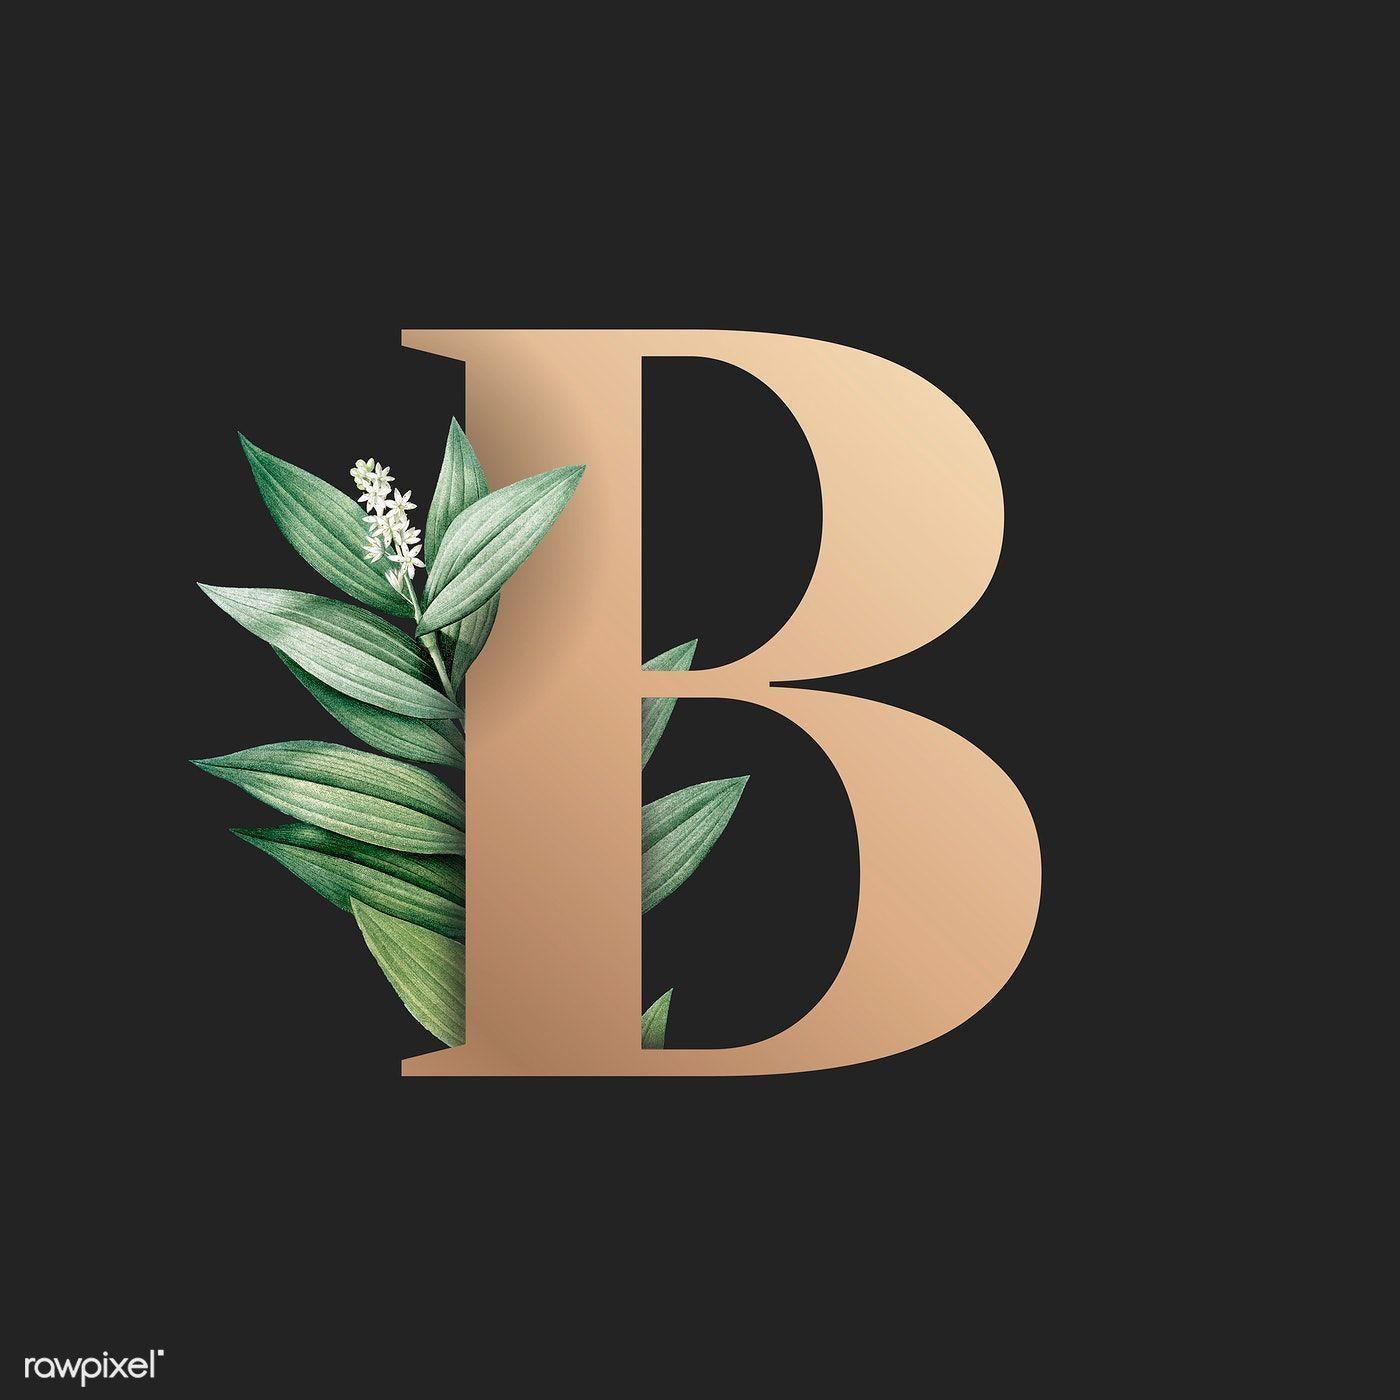 HD letter b wallpapers